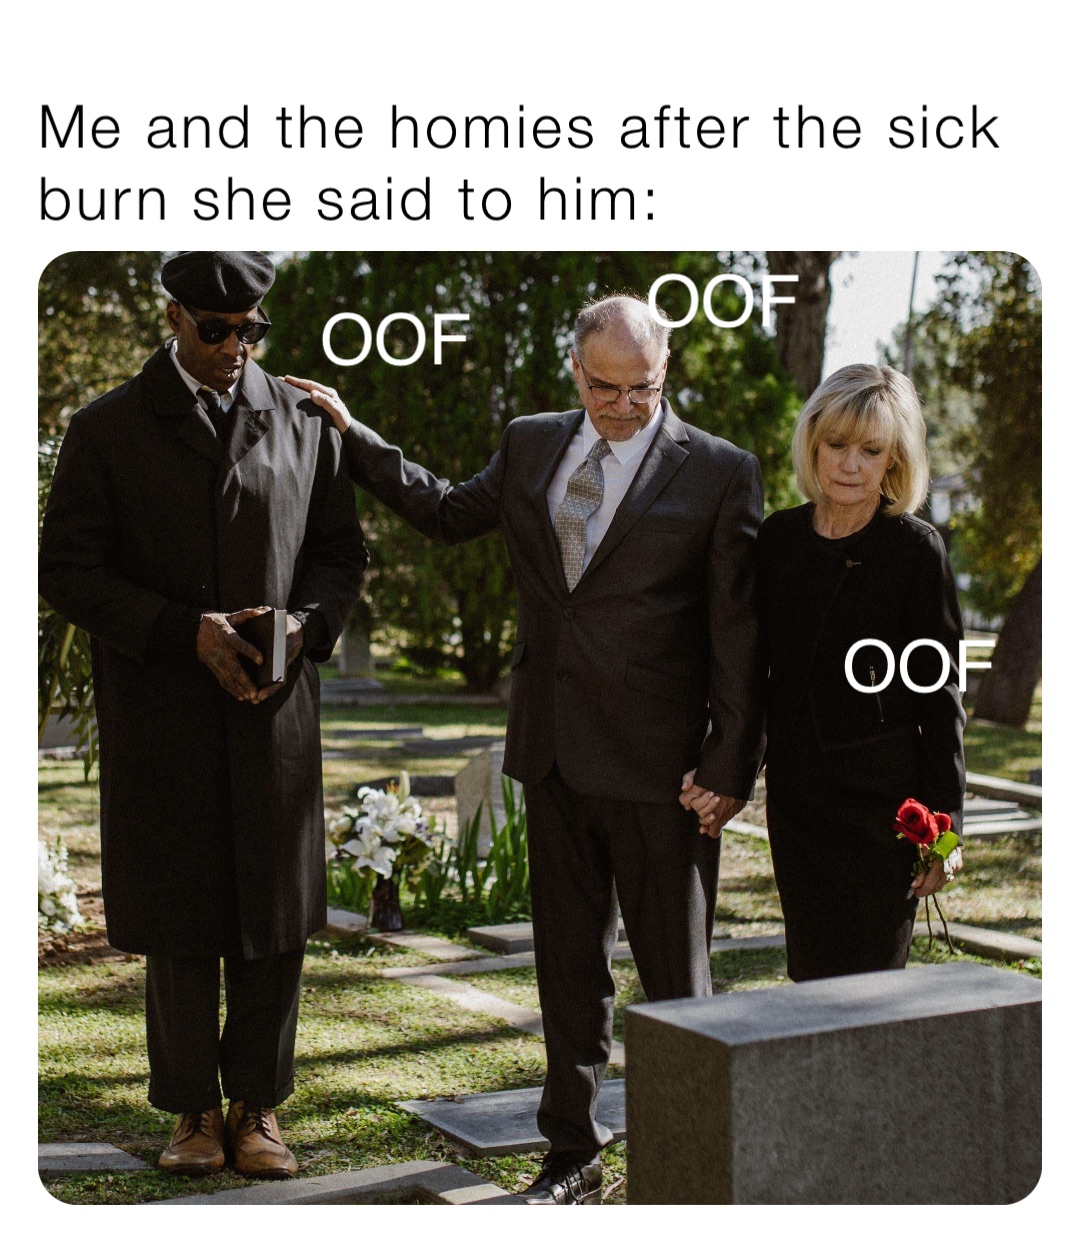 Me and the homies after the sick burn she said to him: OOF OOF OOF